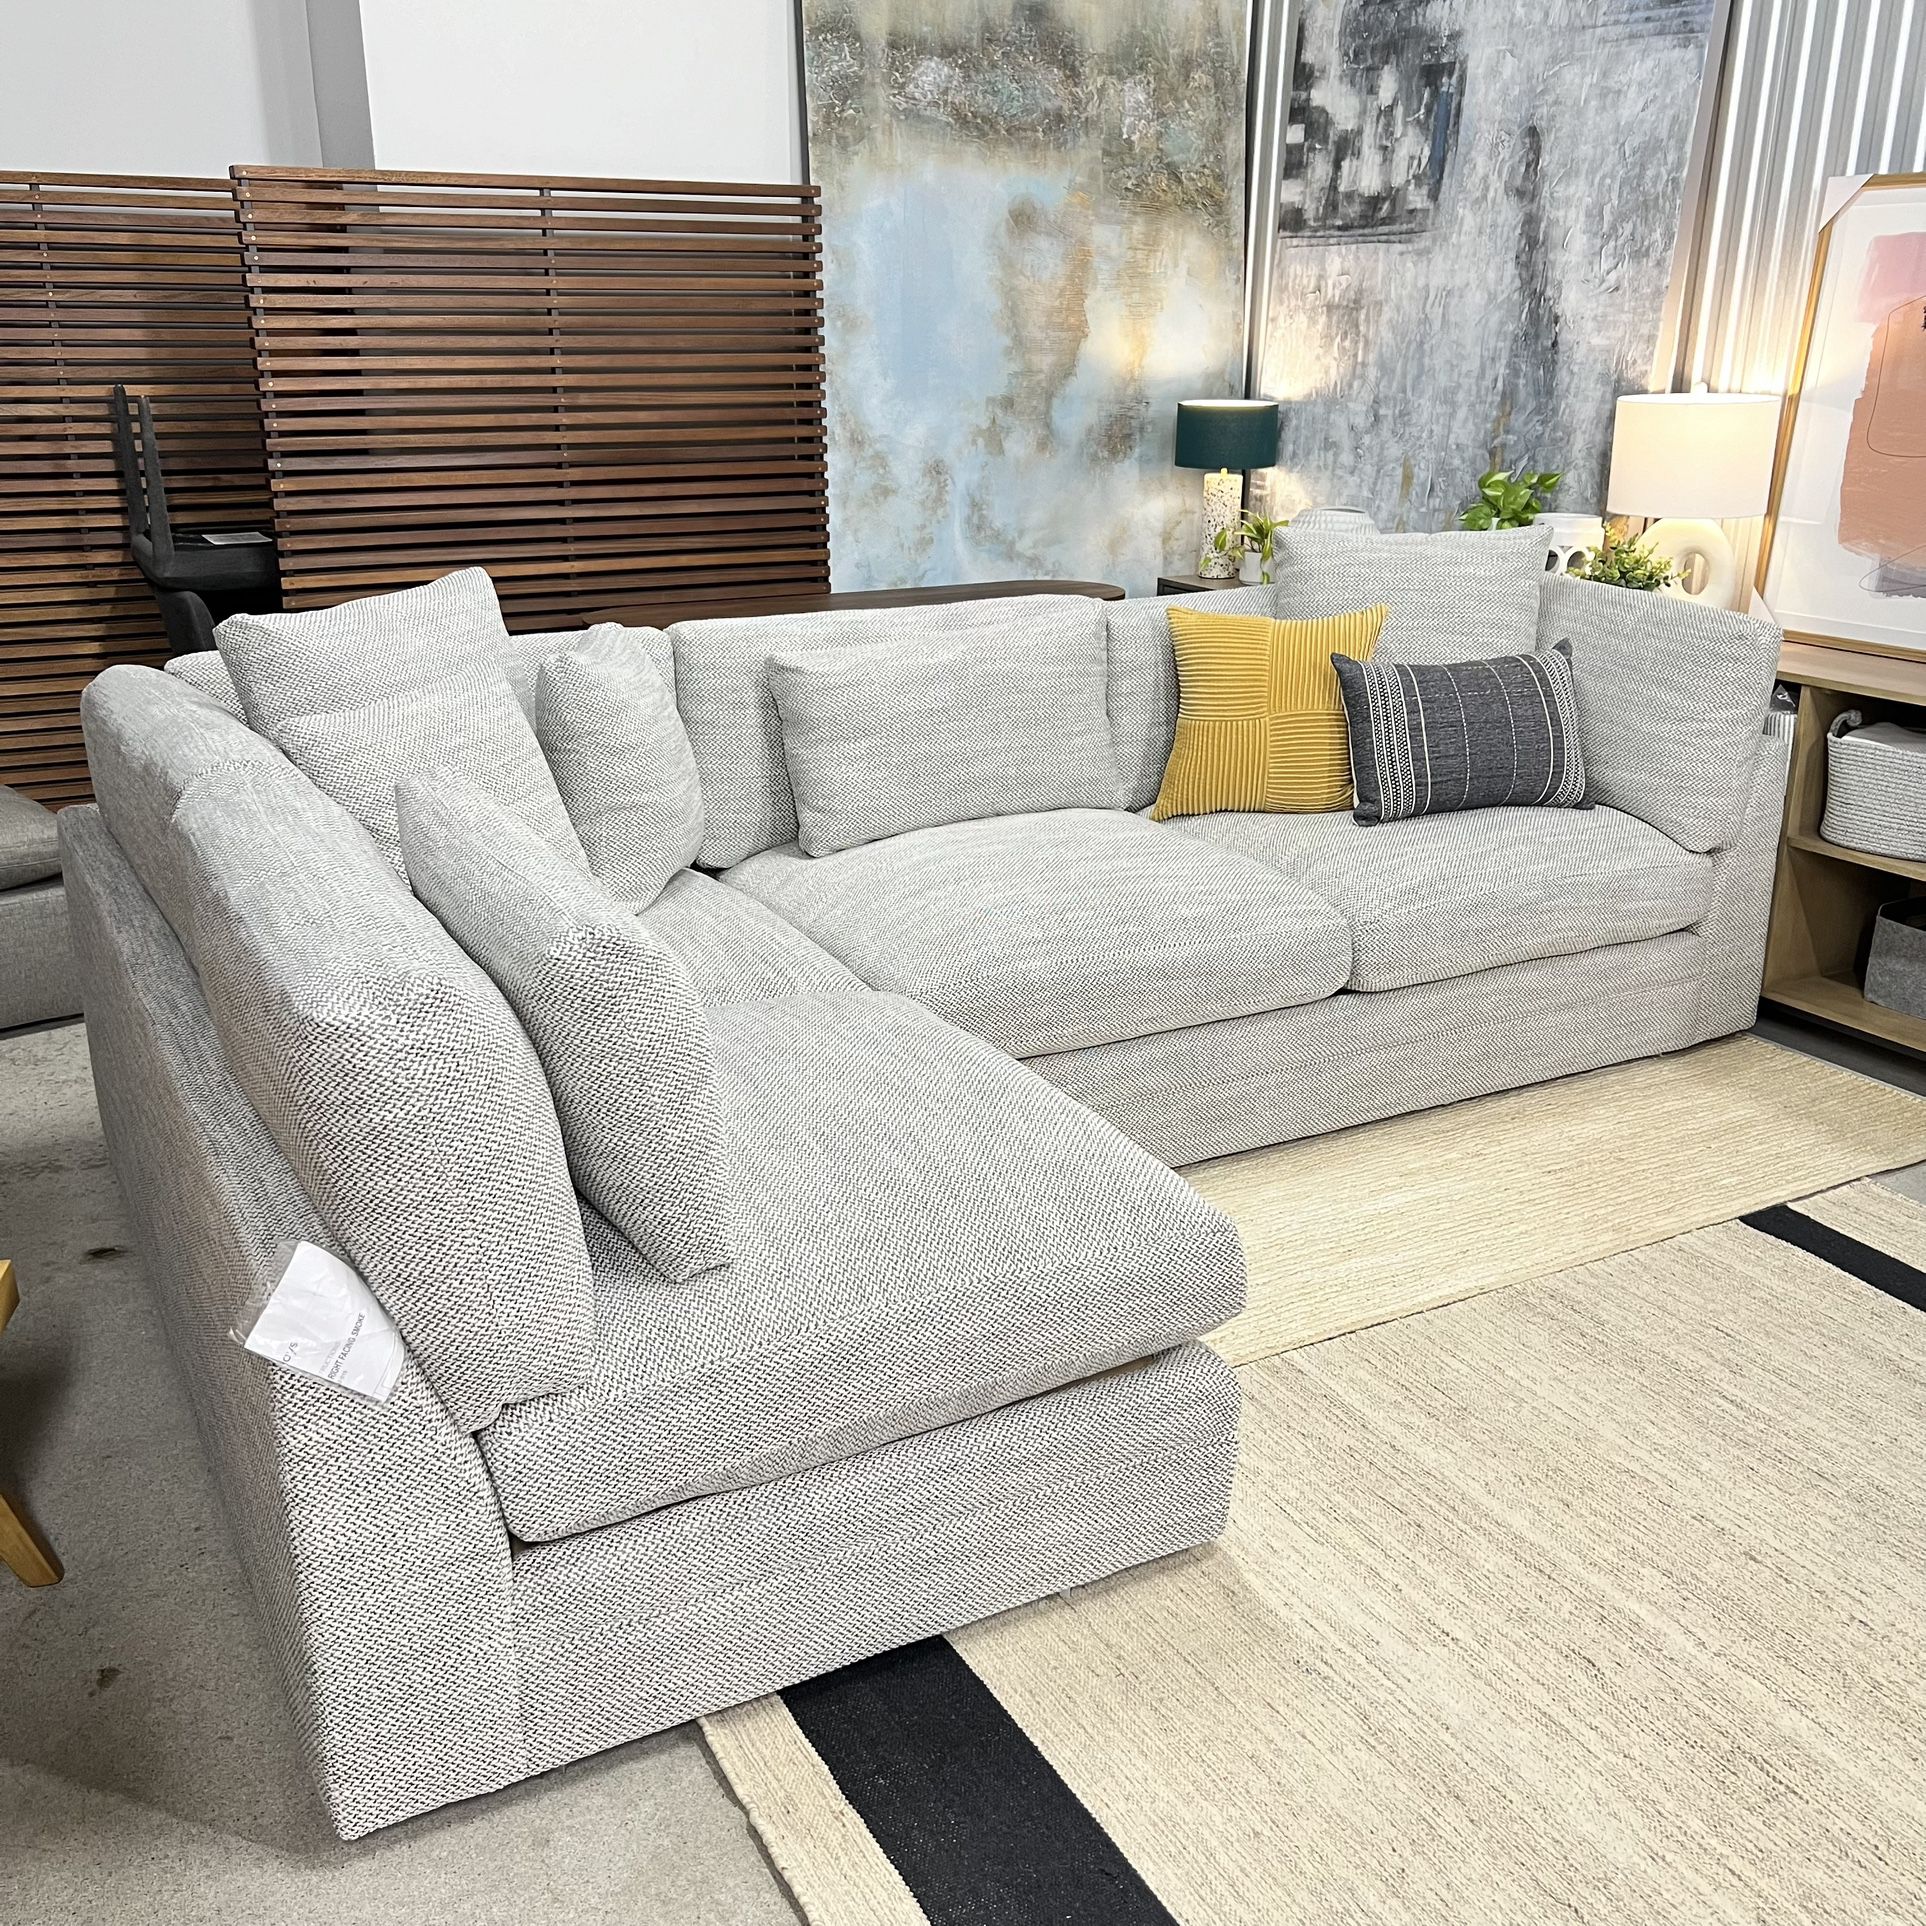 Free Delivery Brand New Sundays Sectional Couch Sofa with Chaise Performance Fabric Stain-Resistant Family-Friendly (retail price $4,500)